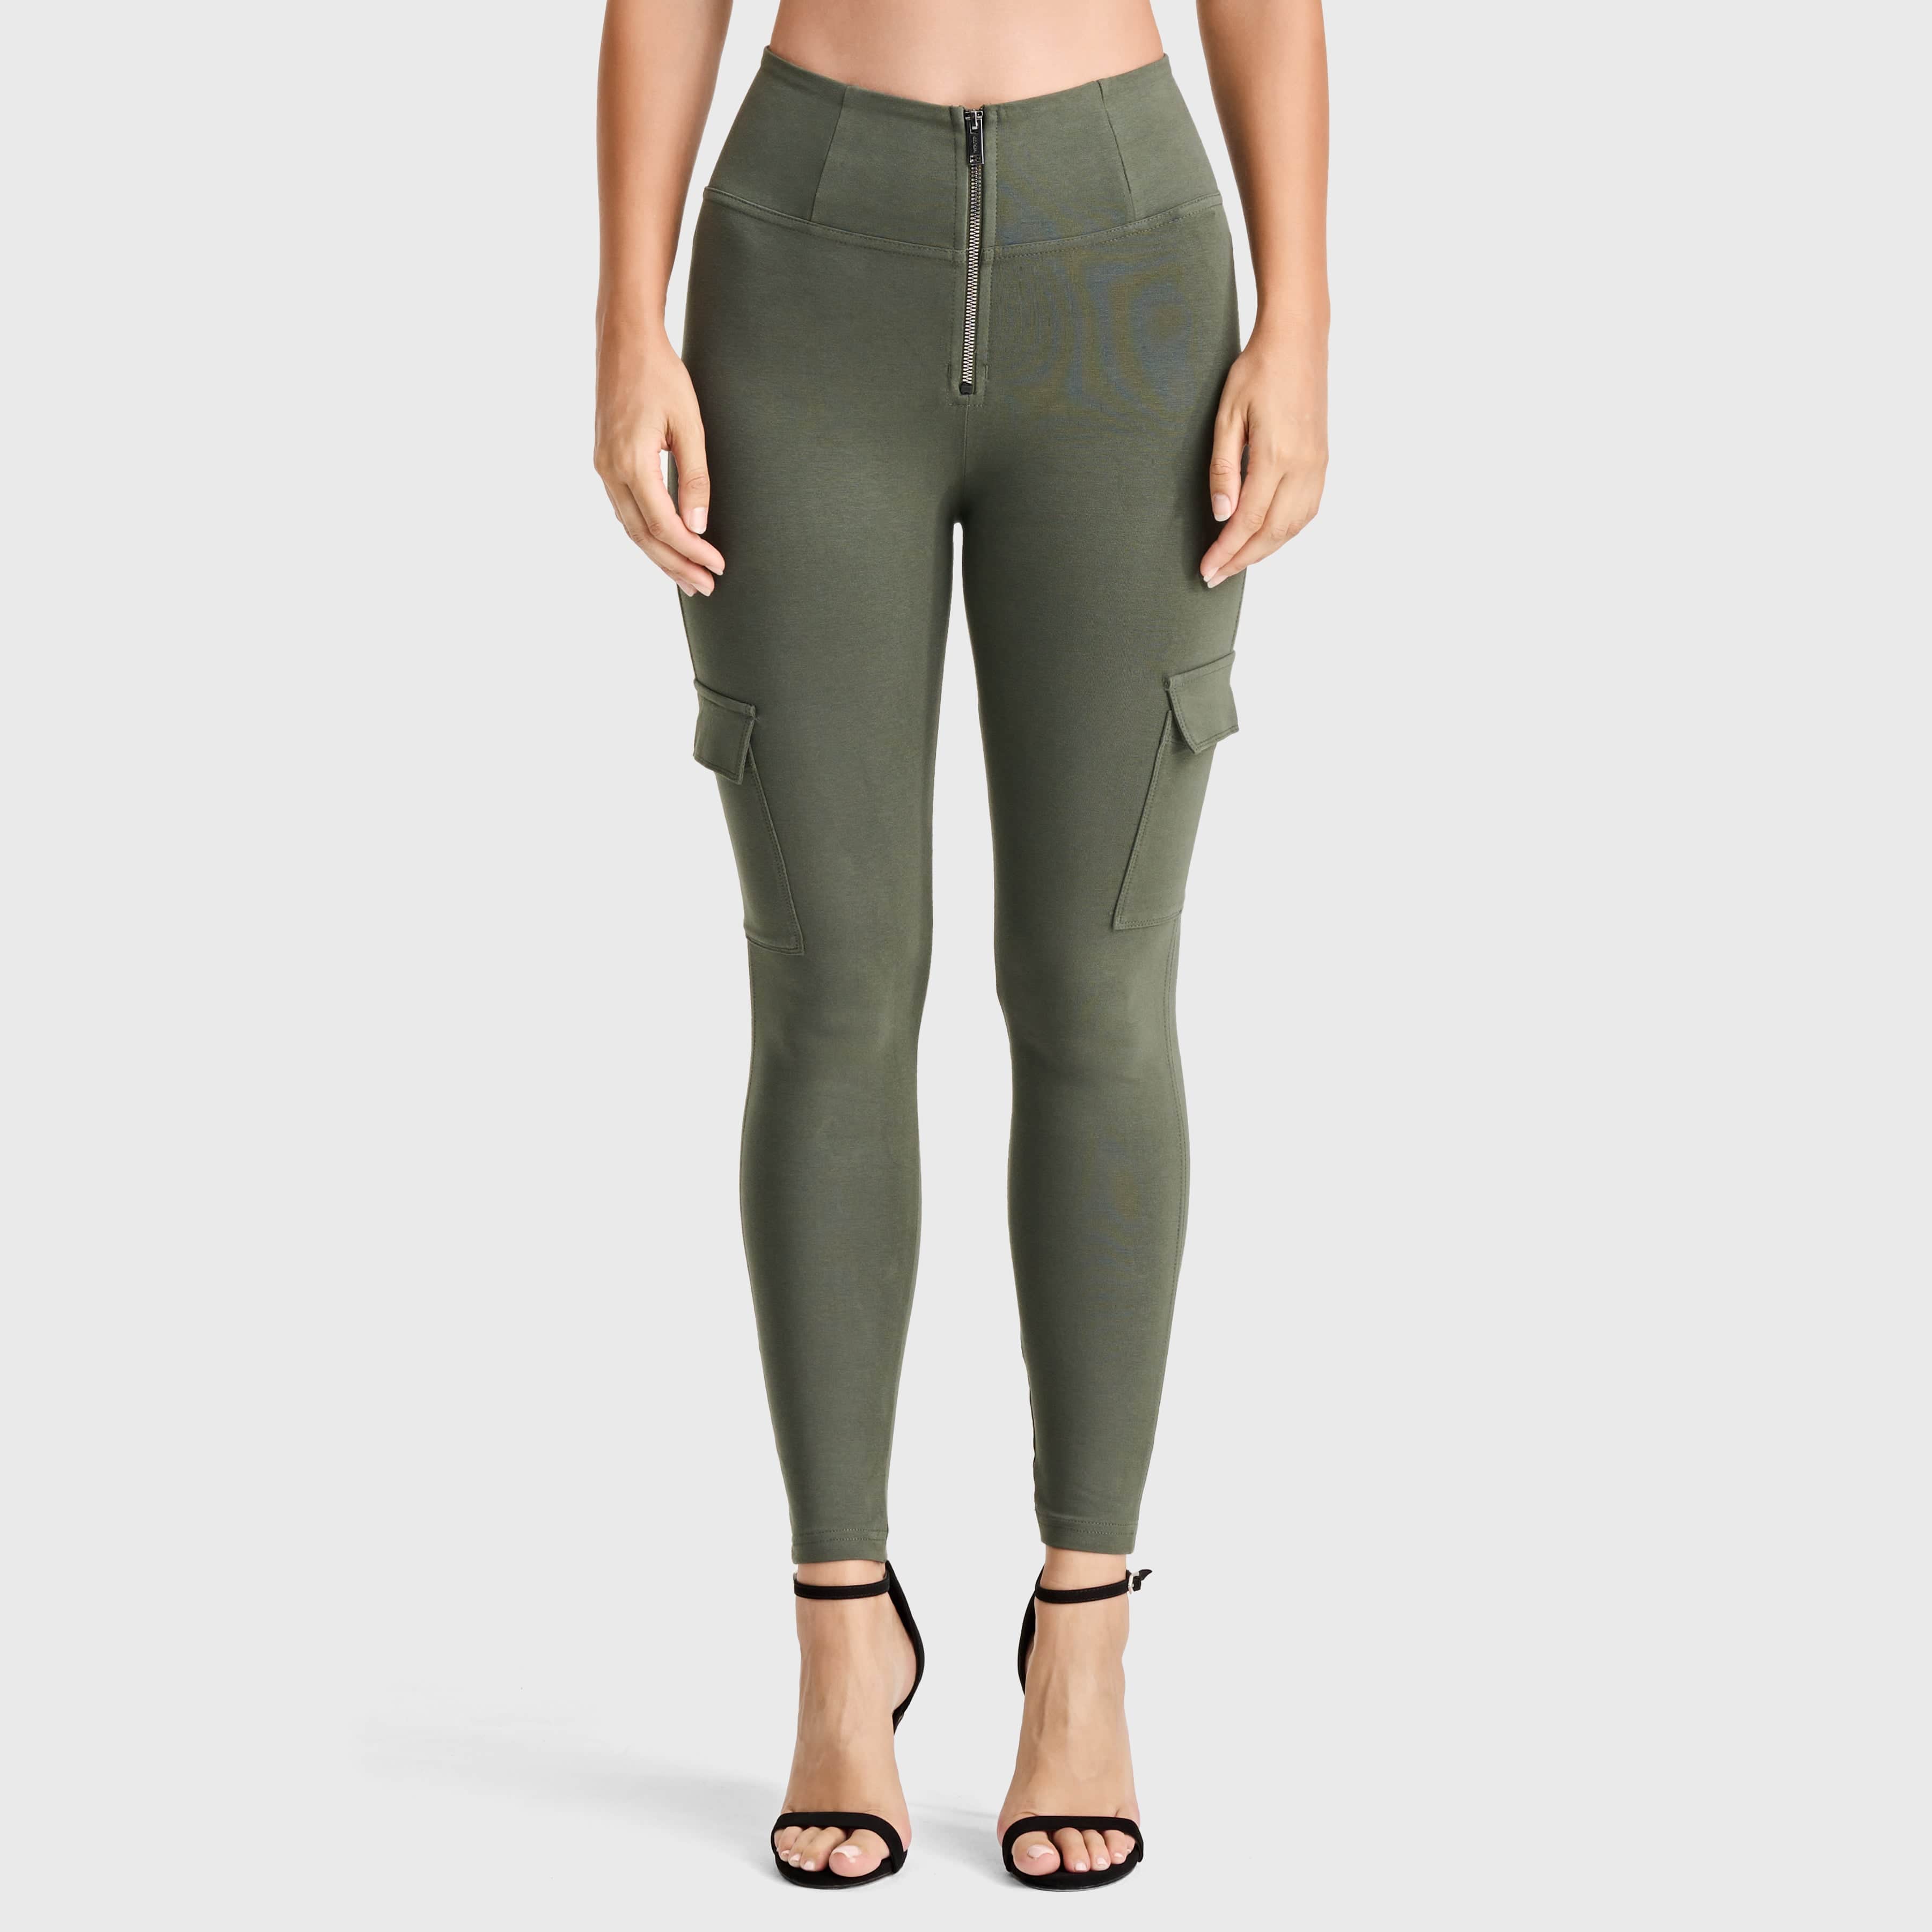 WR.UP® Cargo Fashion - High Waisted - 7/8 Length - Military Green 3